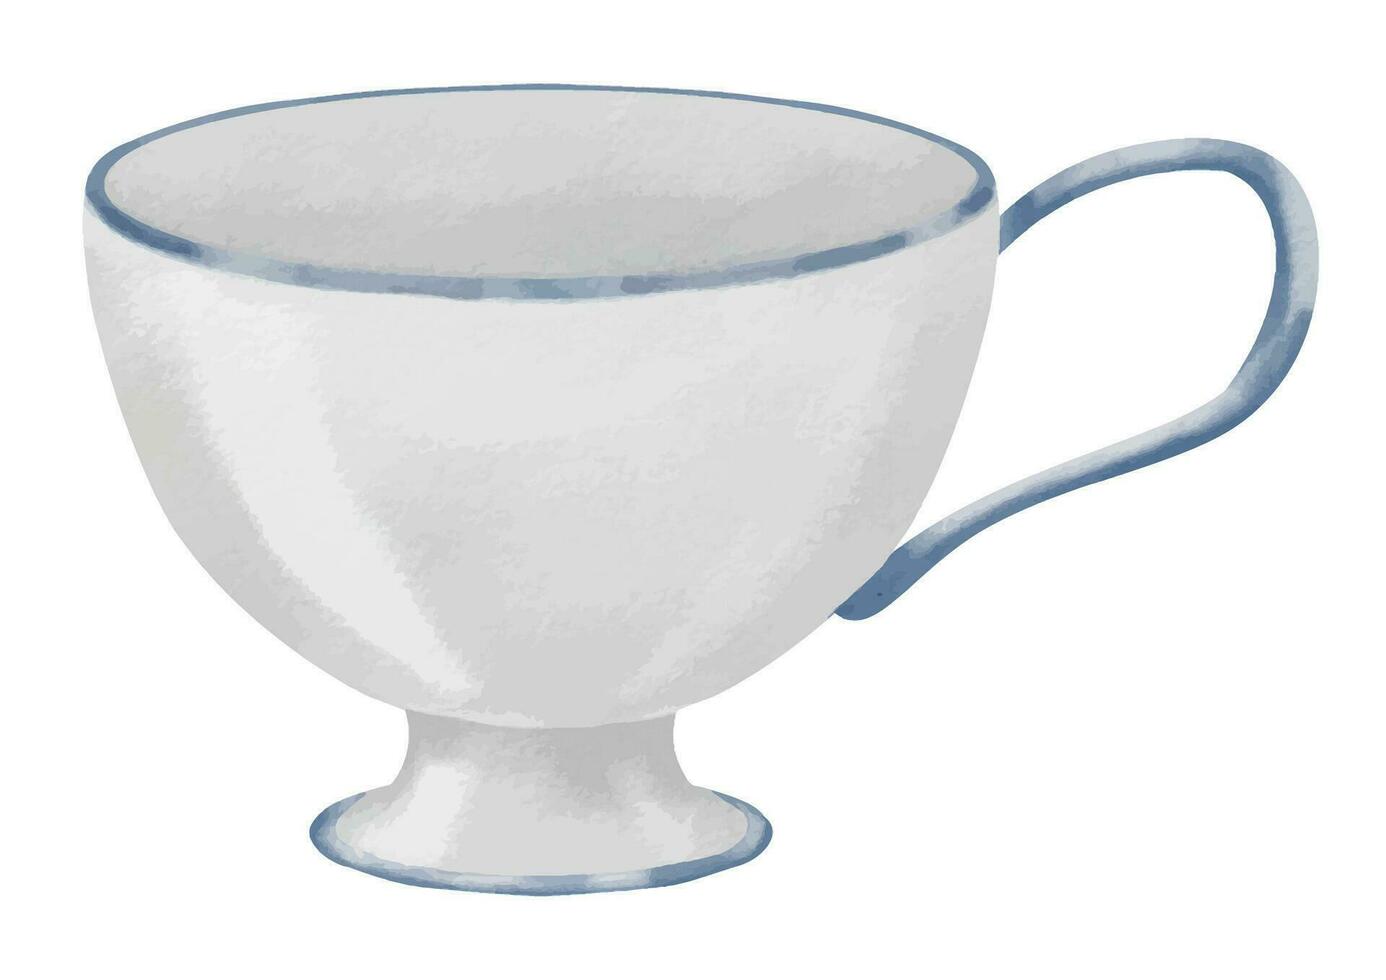 Empty porcelain white Cup for tea or coffee. Hand drawn watercolor illustration of vintage teacup on white isolated background. drawing of ceramic retro Mug for beverage. Sketch of traditional saucer vector